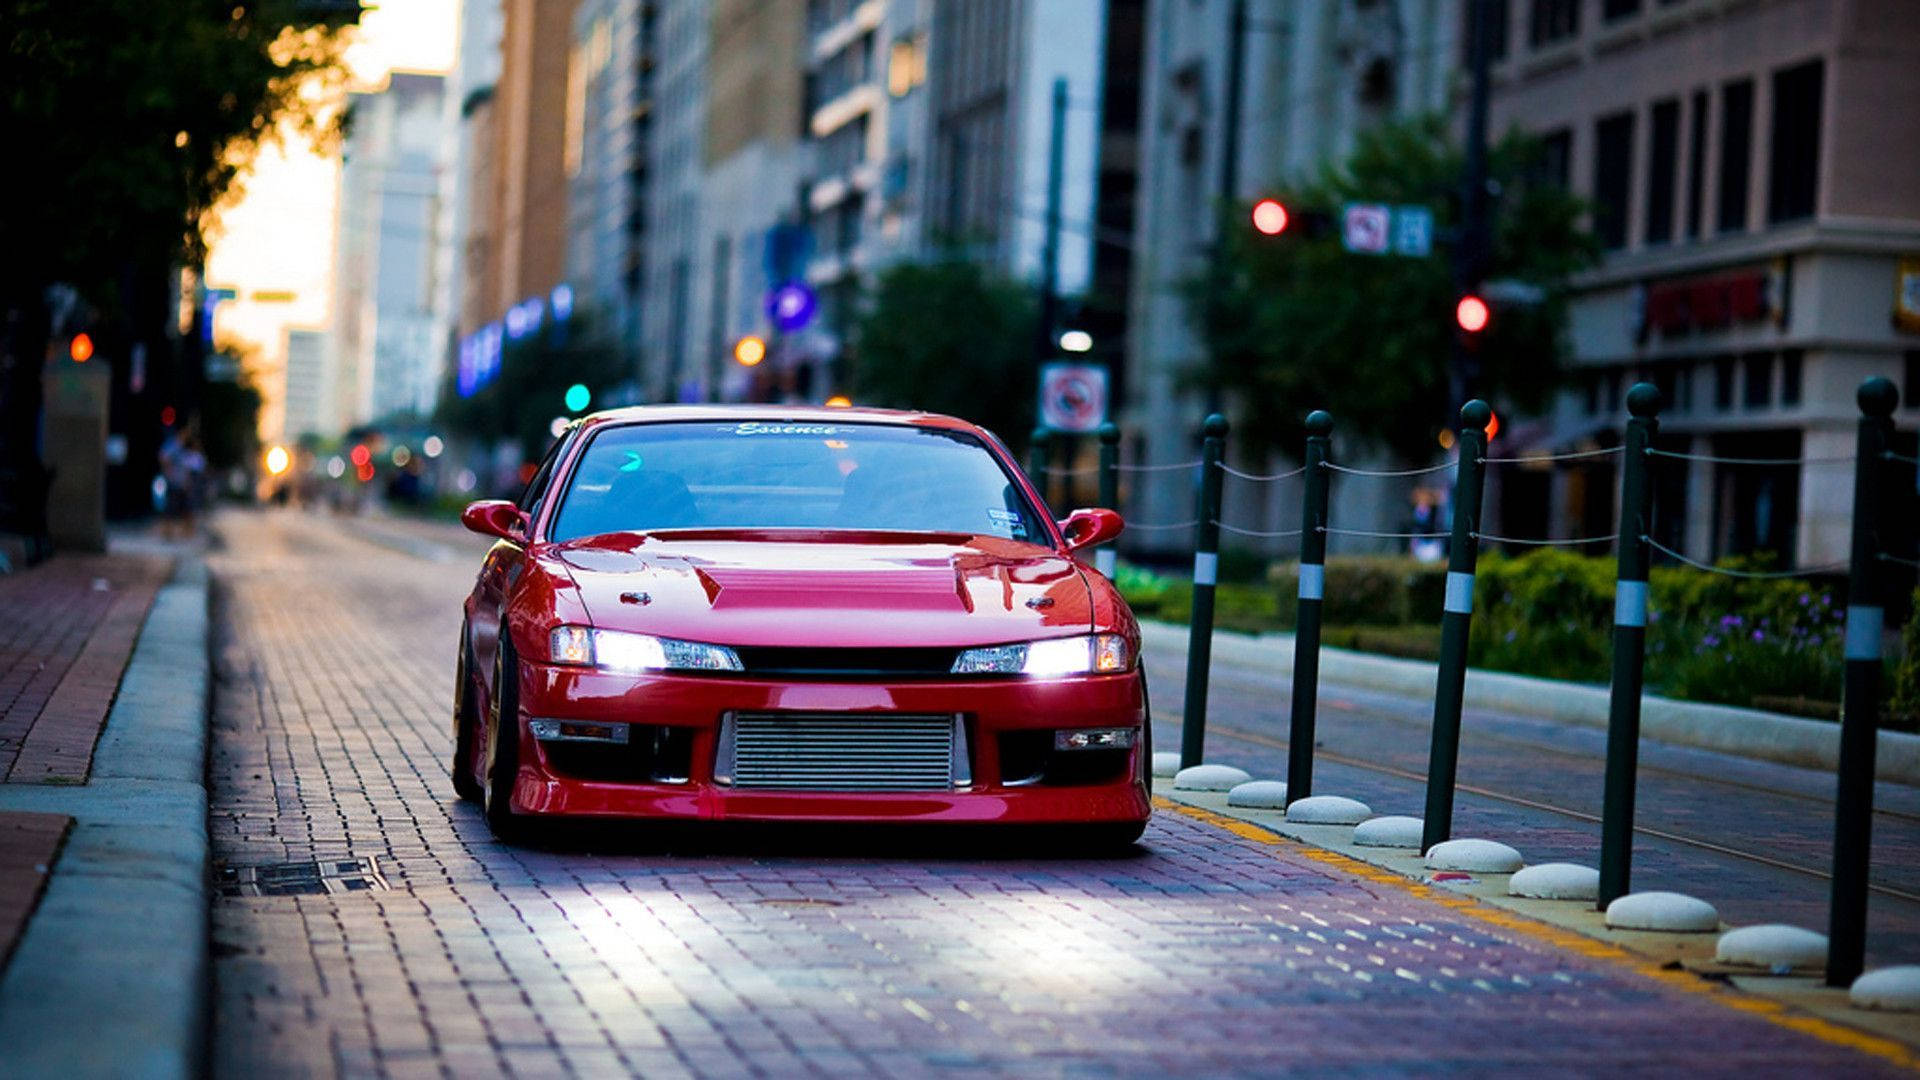 Speed and Style: Red Nissan Silvia S14 Wallpaper